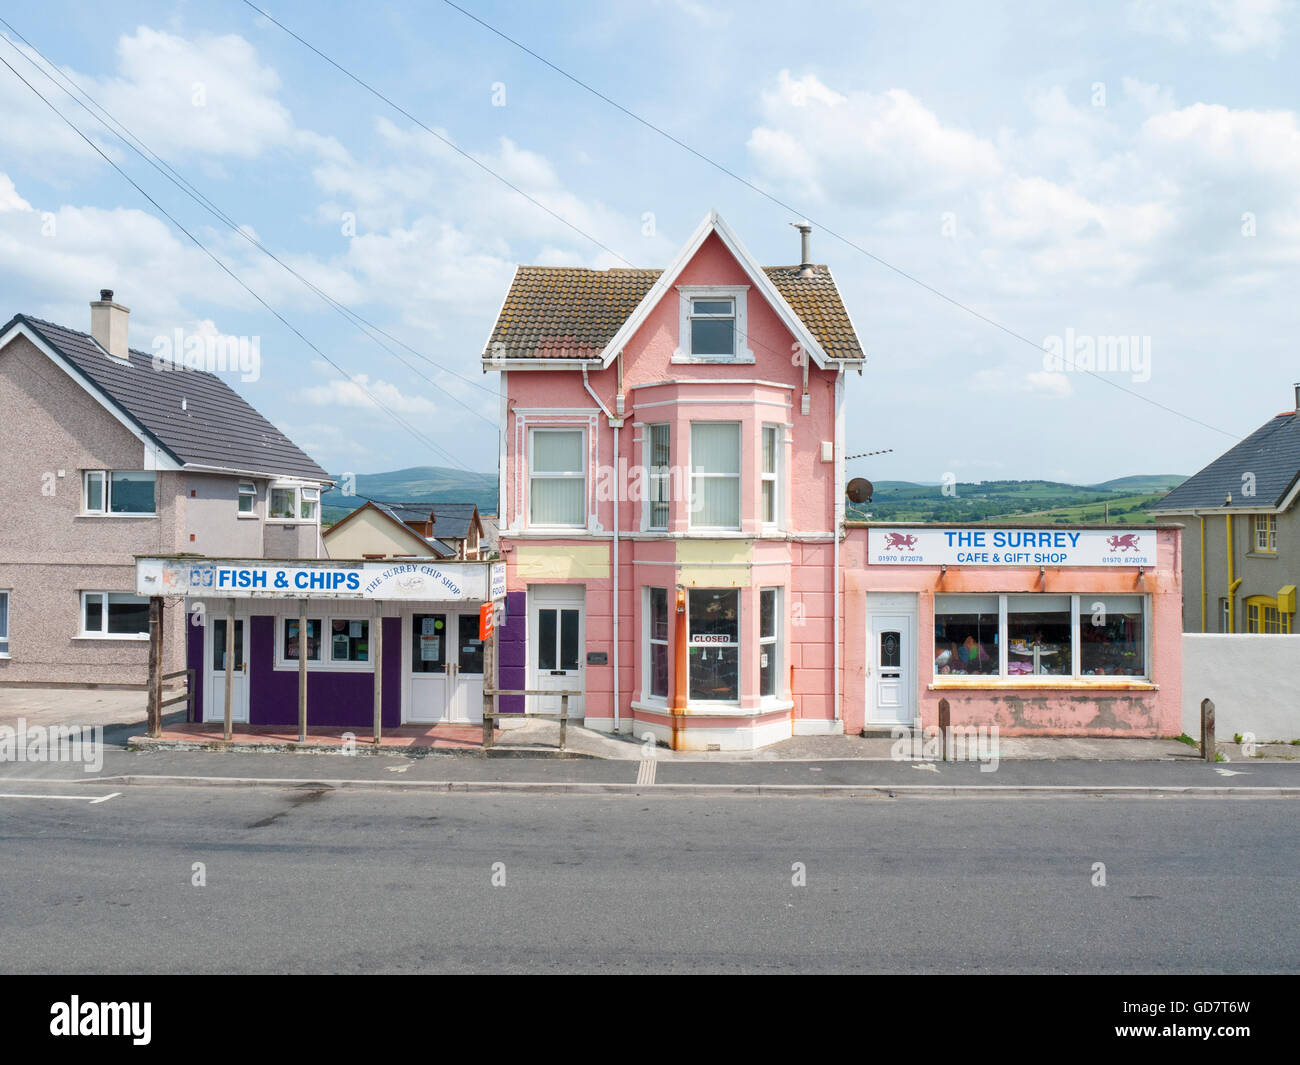 The Surrey fish & chips shop in Borth Ceredigion Wales UK Stock Photo